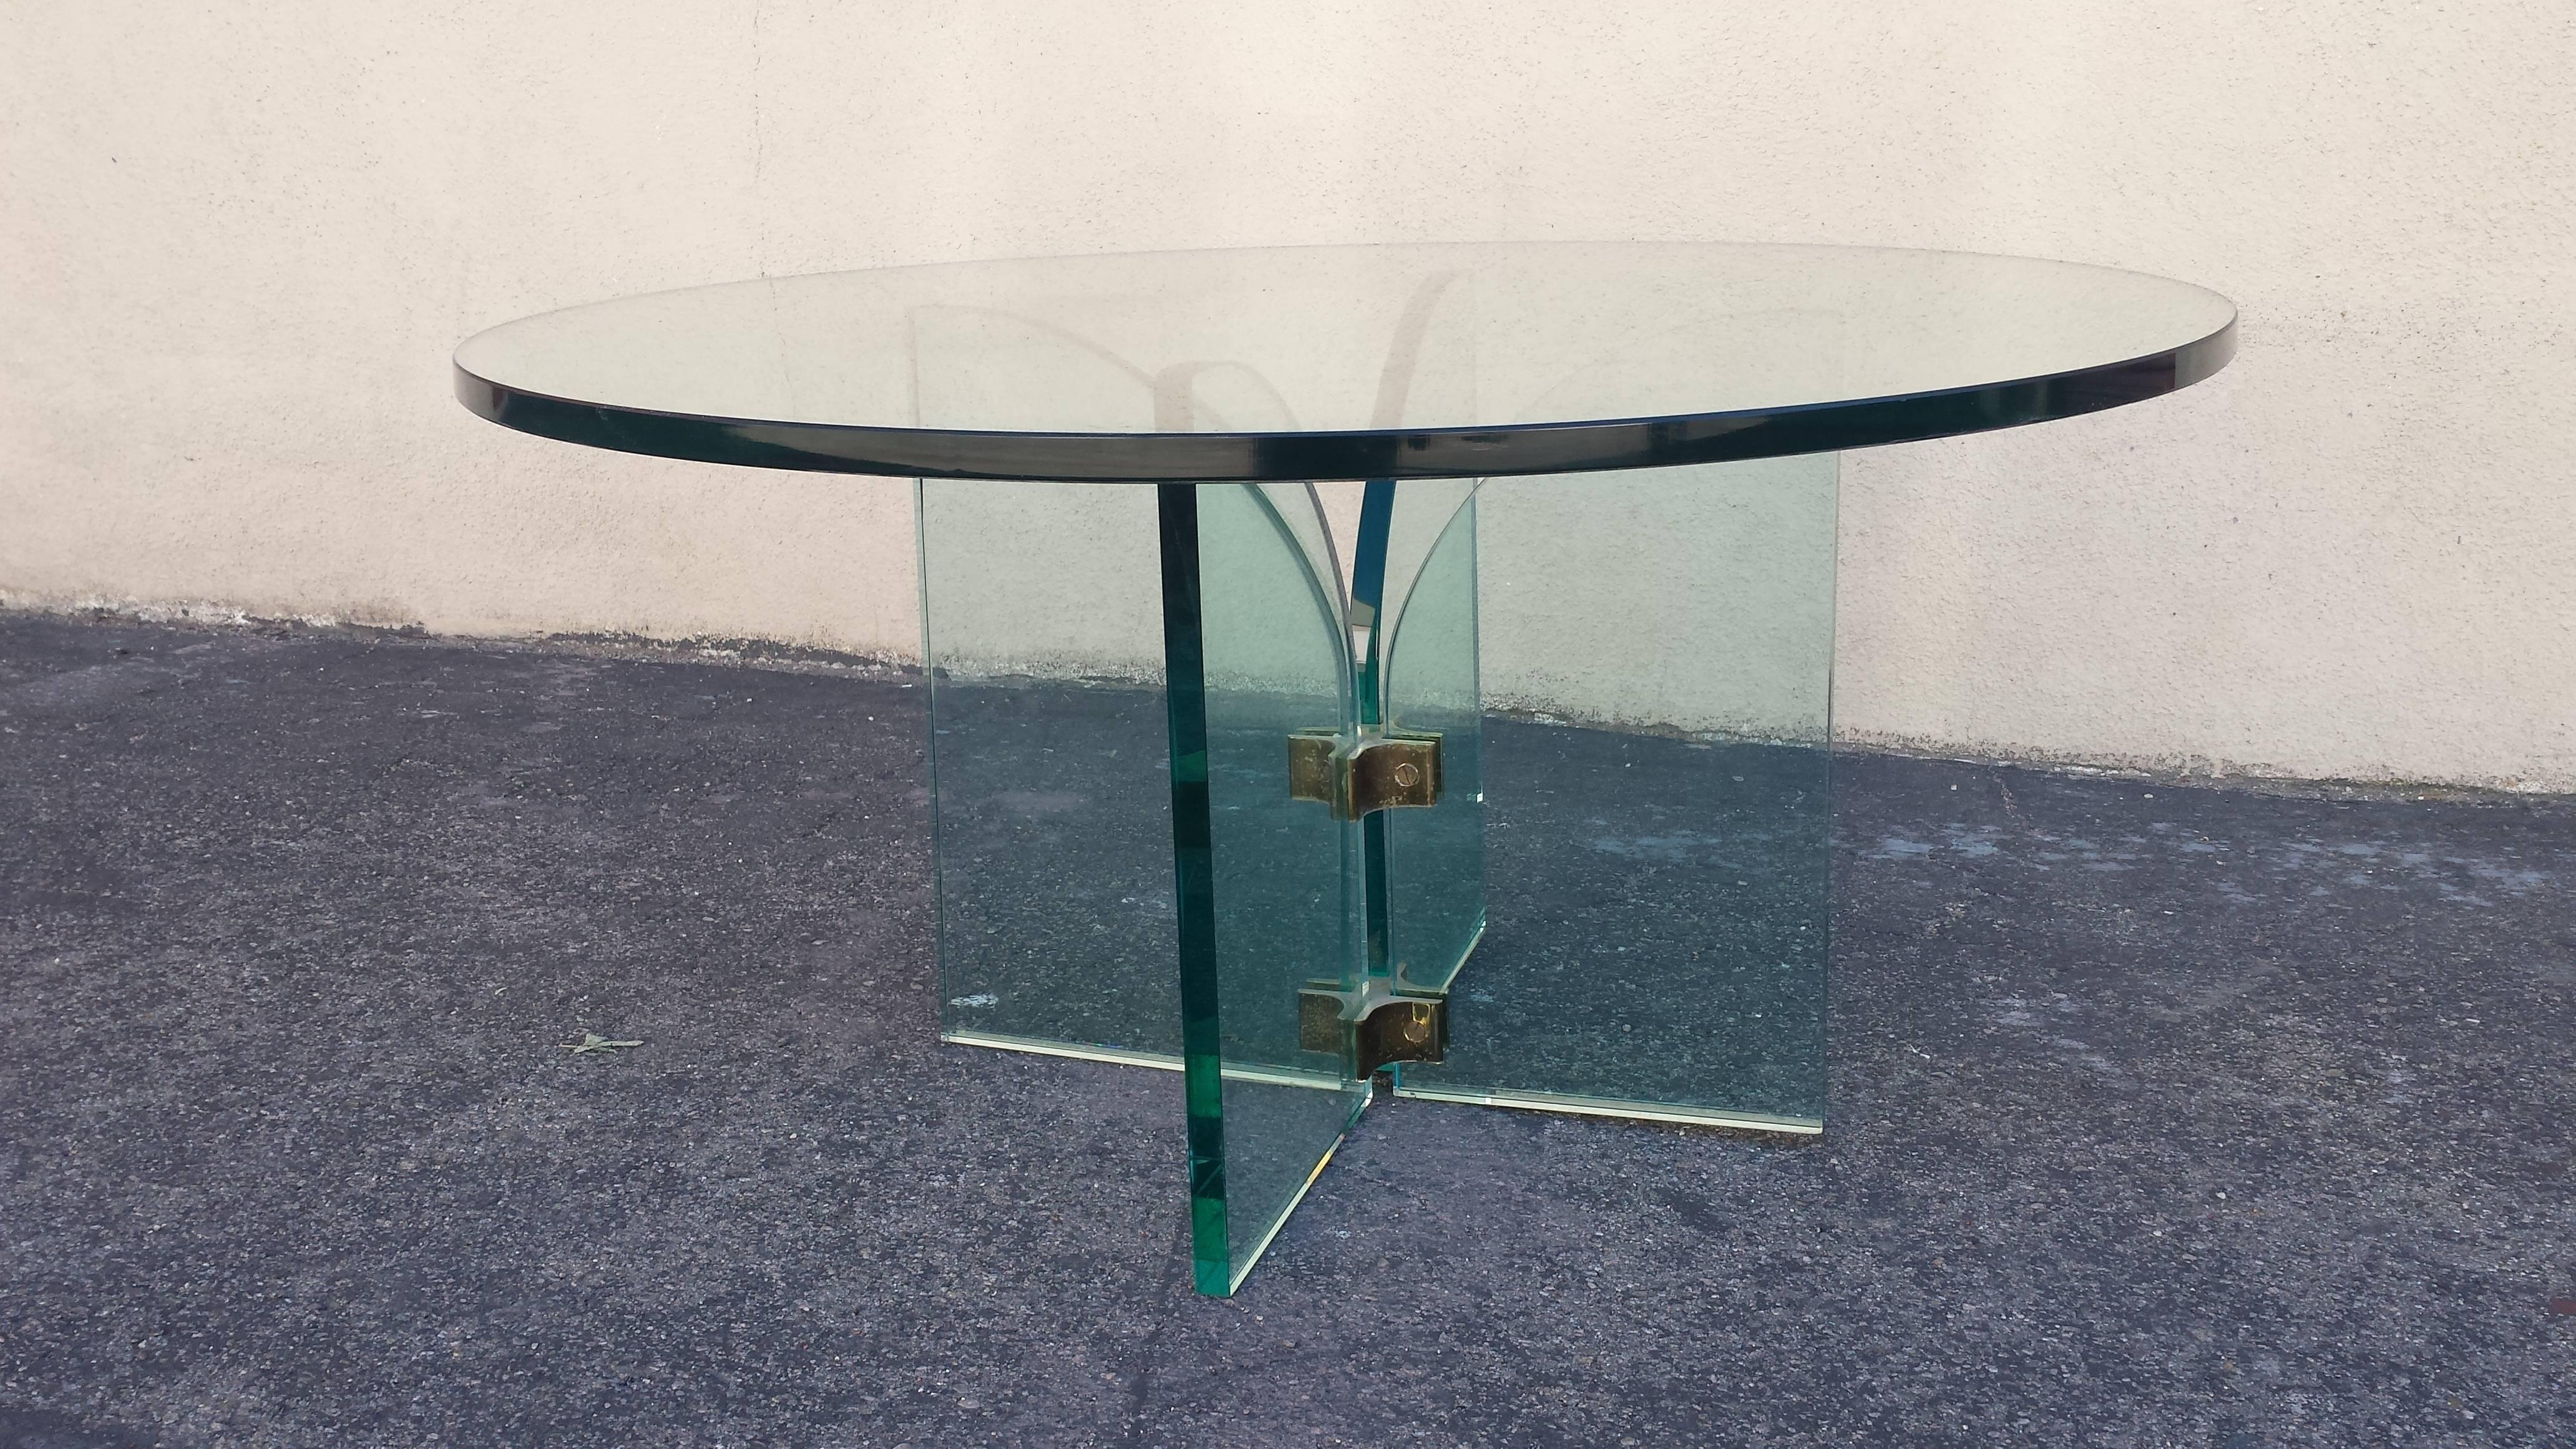 A  sleek round glass coffee or cocktail table in the mid century modern style. The glass is 3/4